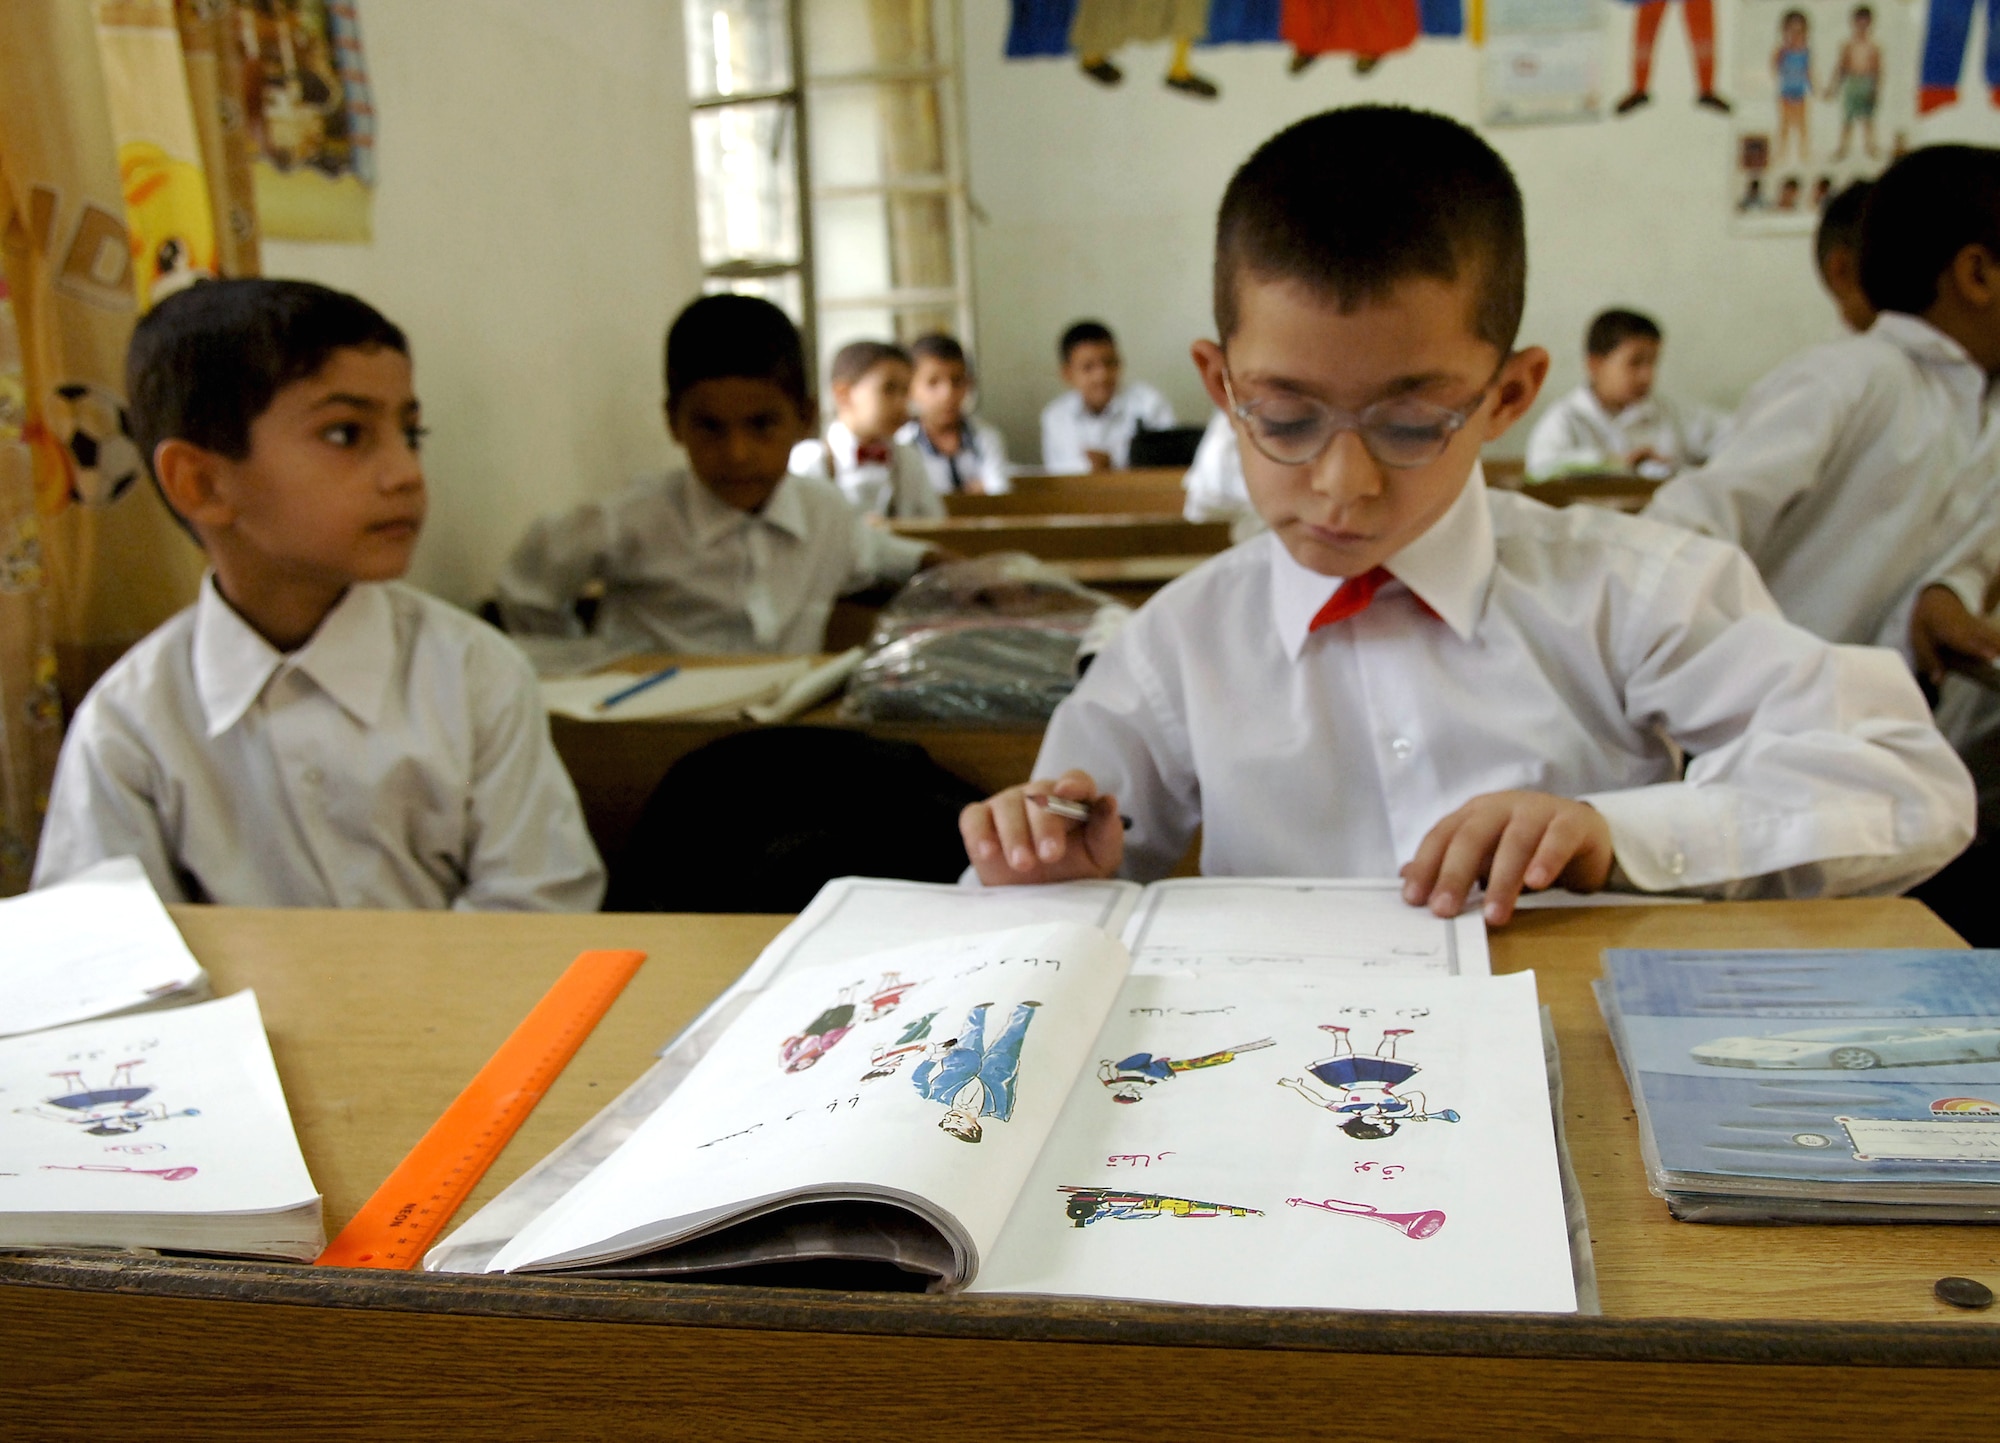 A young Iraqi boy looks over his lessons at a primary school in the Bayaa District of Baghdad, Iraq, Oct. 31. (U.S. Air Force photo/Master Sgt. Mike Buytas)